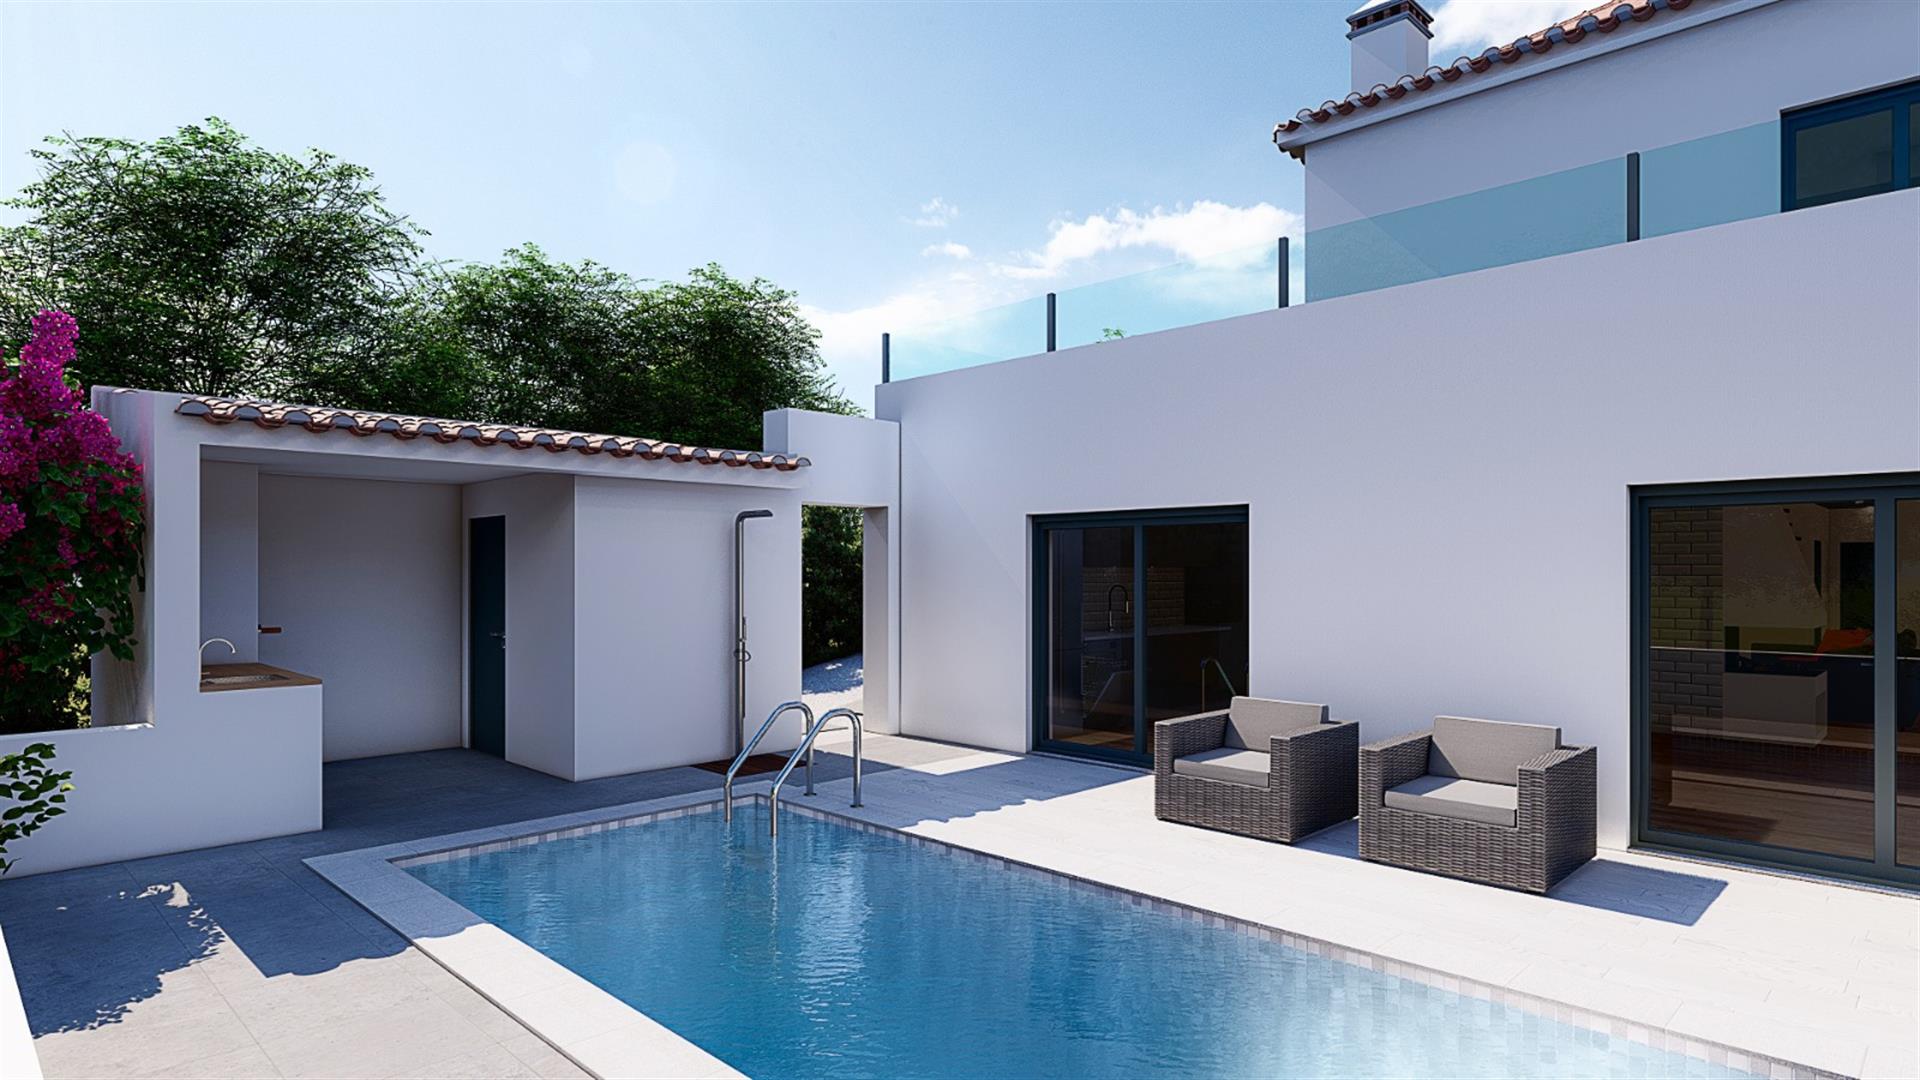 Excellent new T4 villa in the countryside and close to the beach and the city of Lisbon.